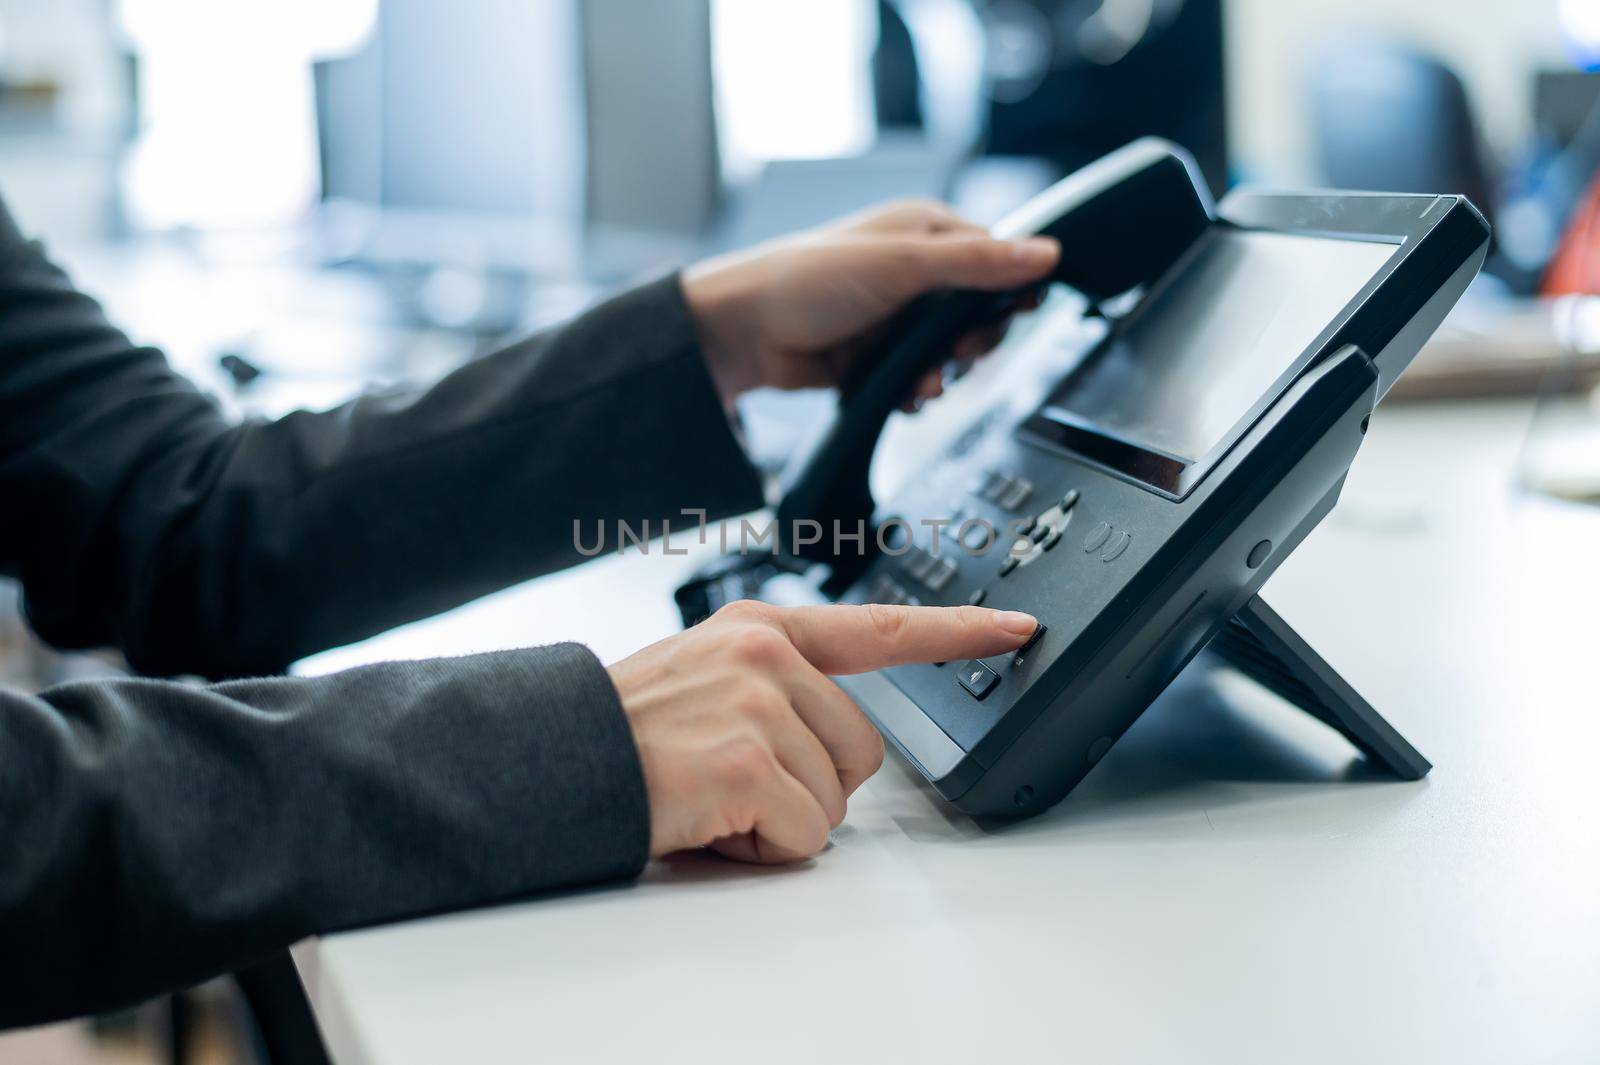 Closeup female hand on landline phone in office. Faceless woman in a suit works as a receptionist answering the phone to customer calls